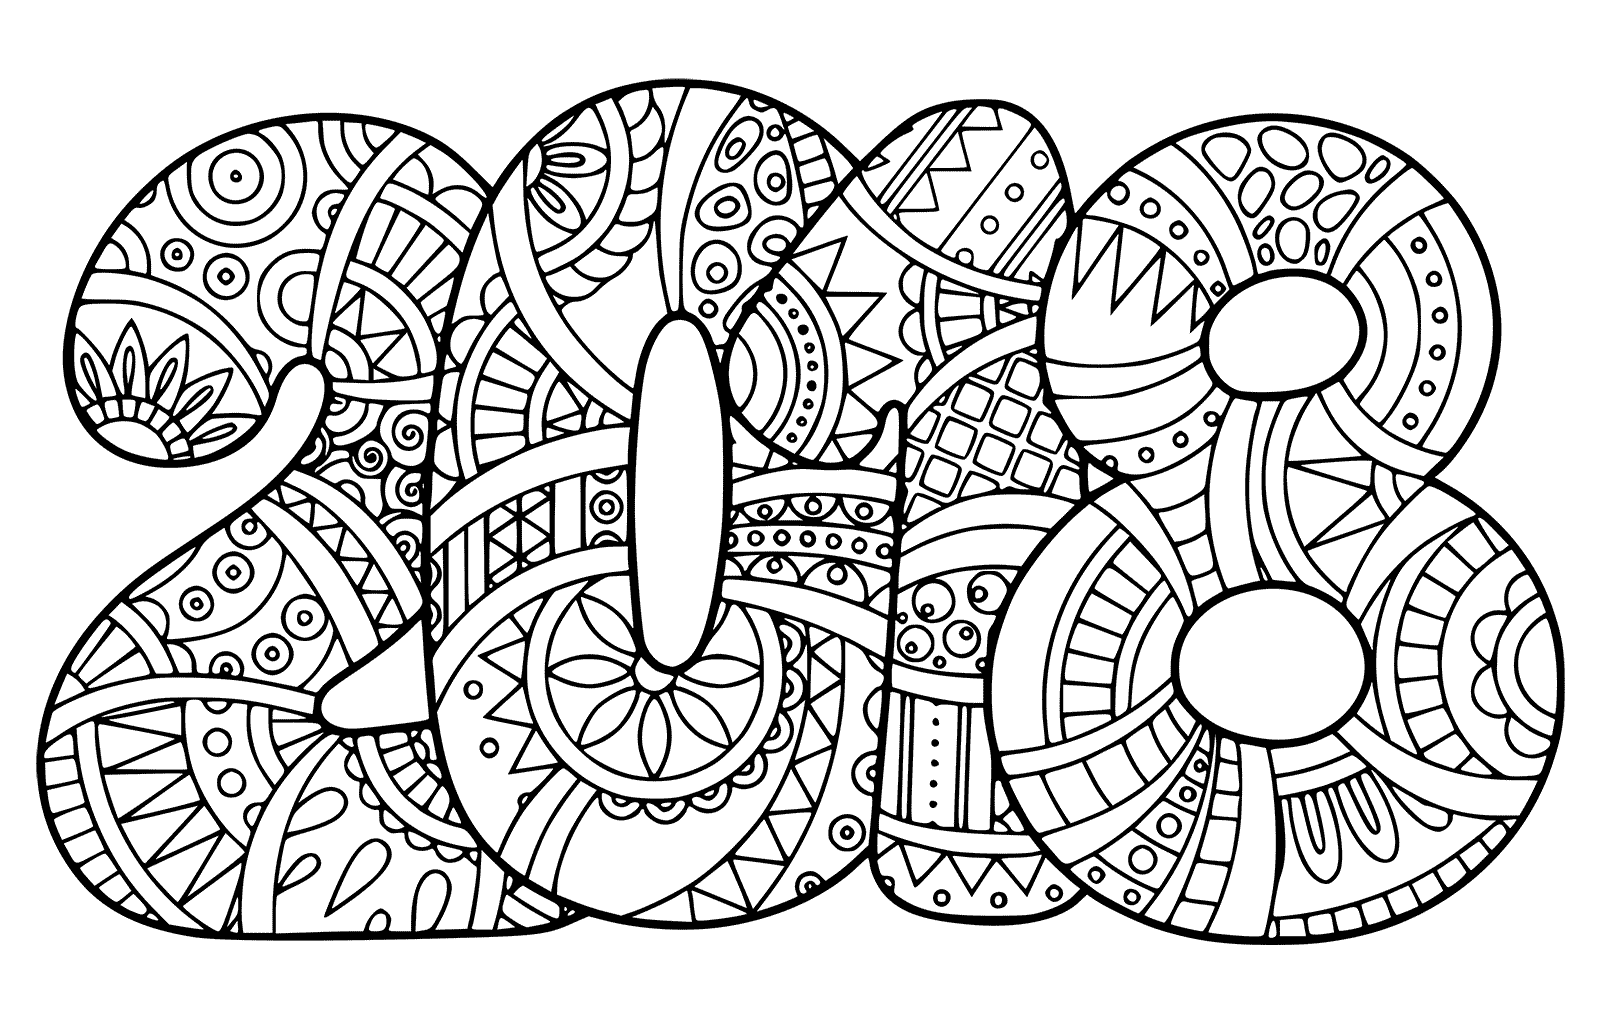 New Year 2018 Coloring Pages Template Image Picture Photo Wallpaper 02